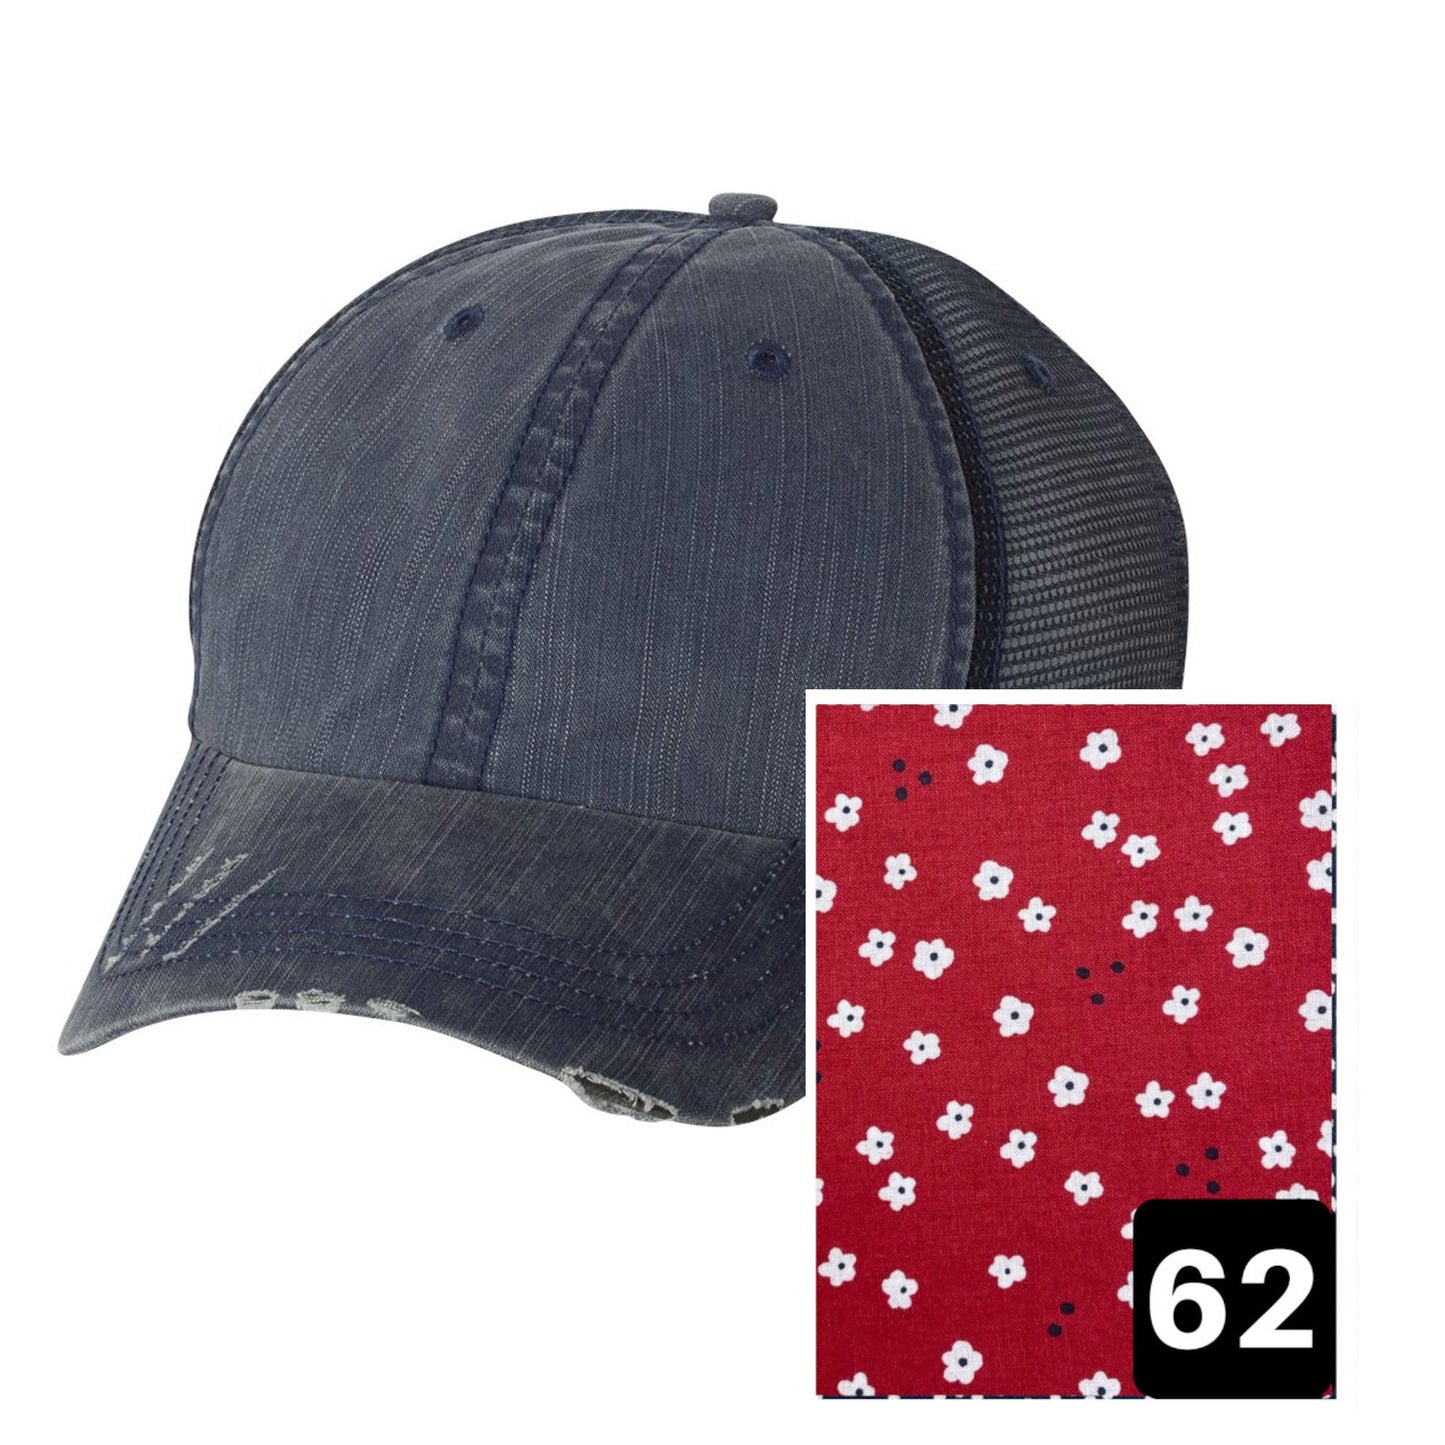 New Hampshire Hat | Navy Distressed Trucker Cap | Many Fabric Choices